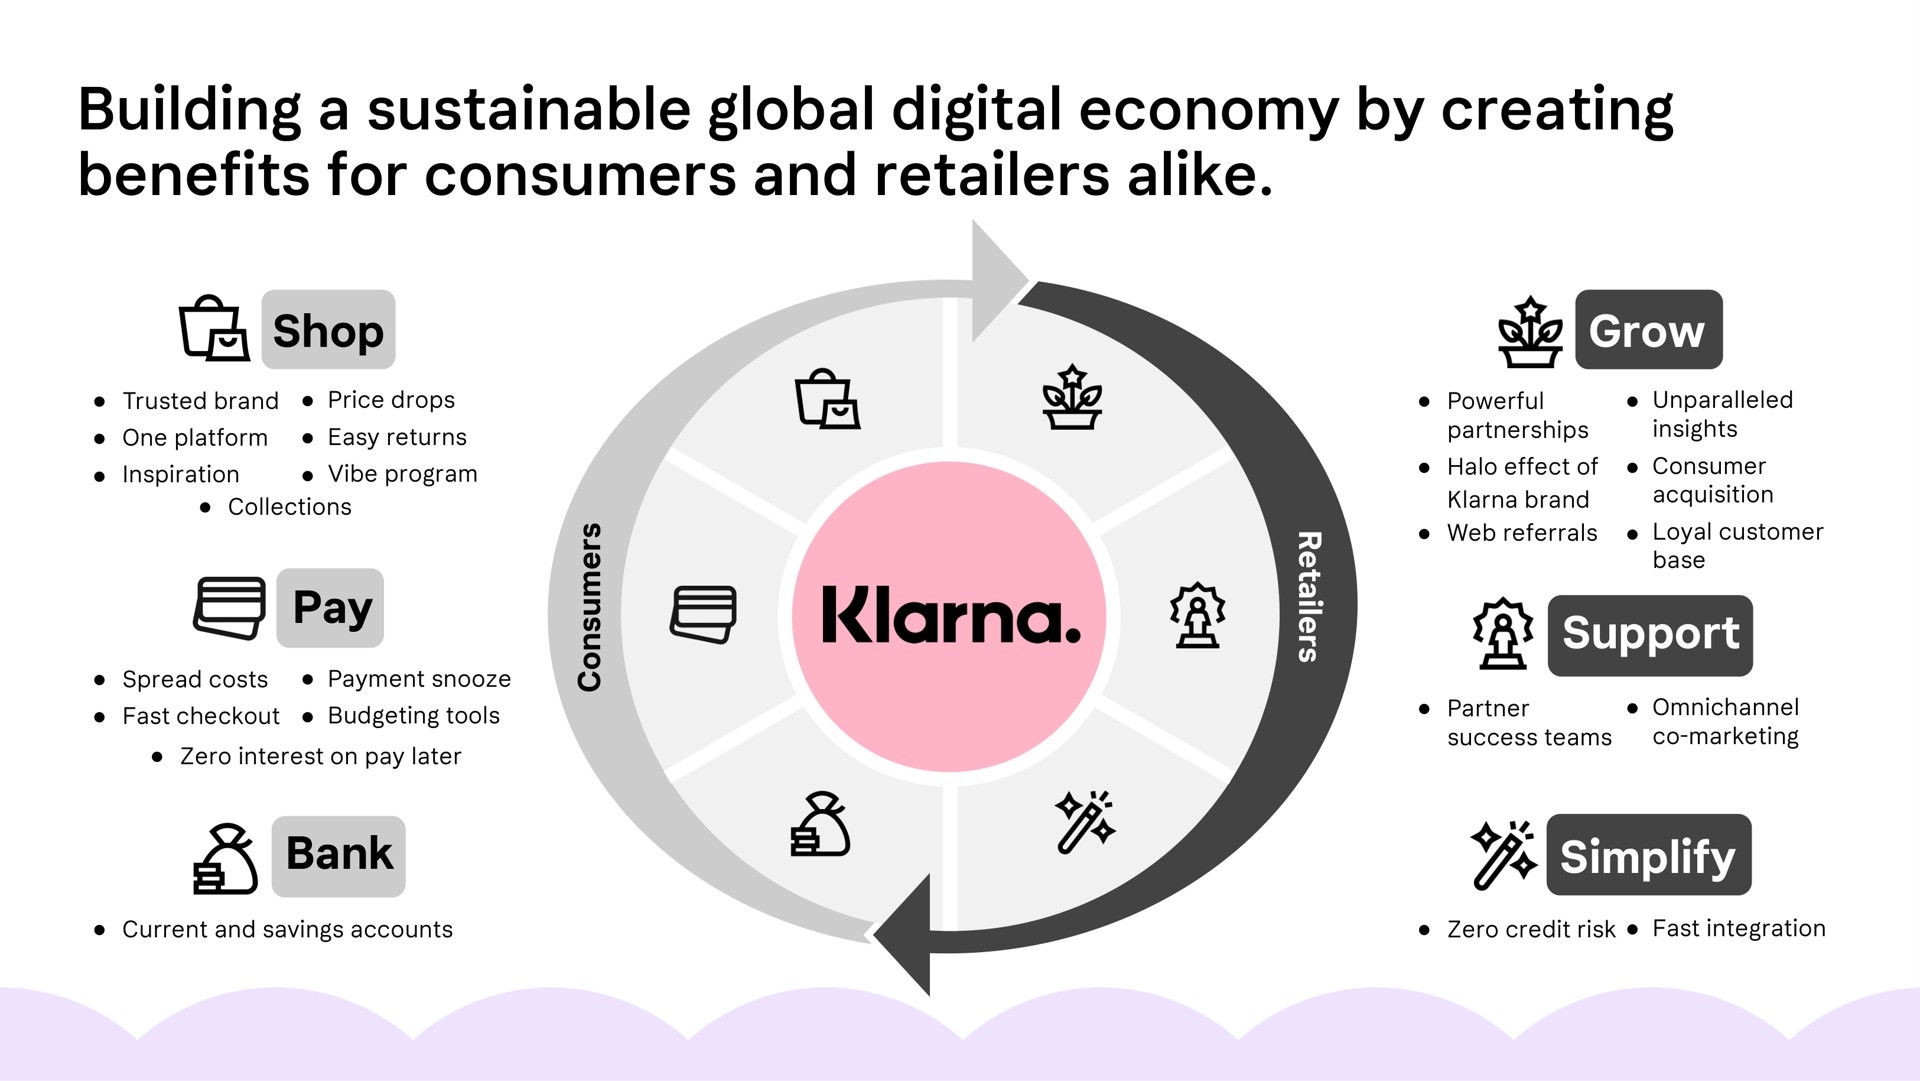 building a sustainable global digital economy by creating benefits for consumers and retailers alike i | Klarna